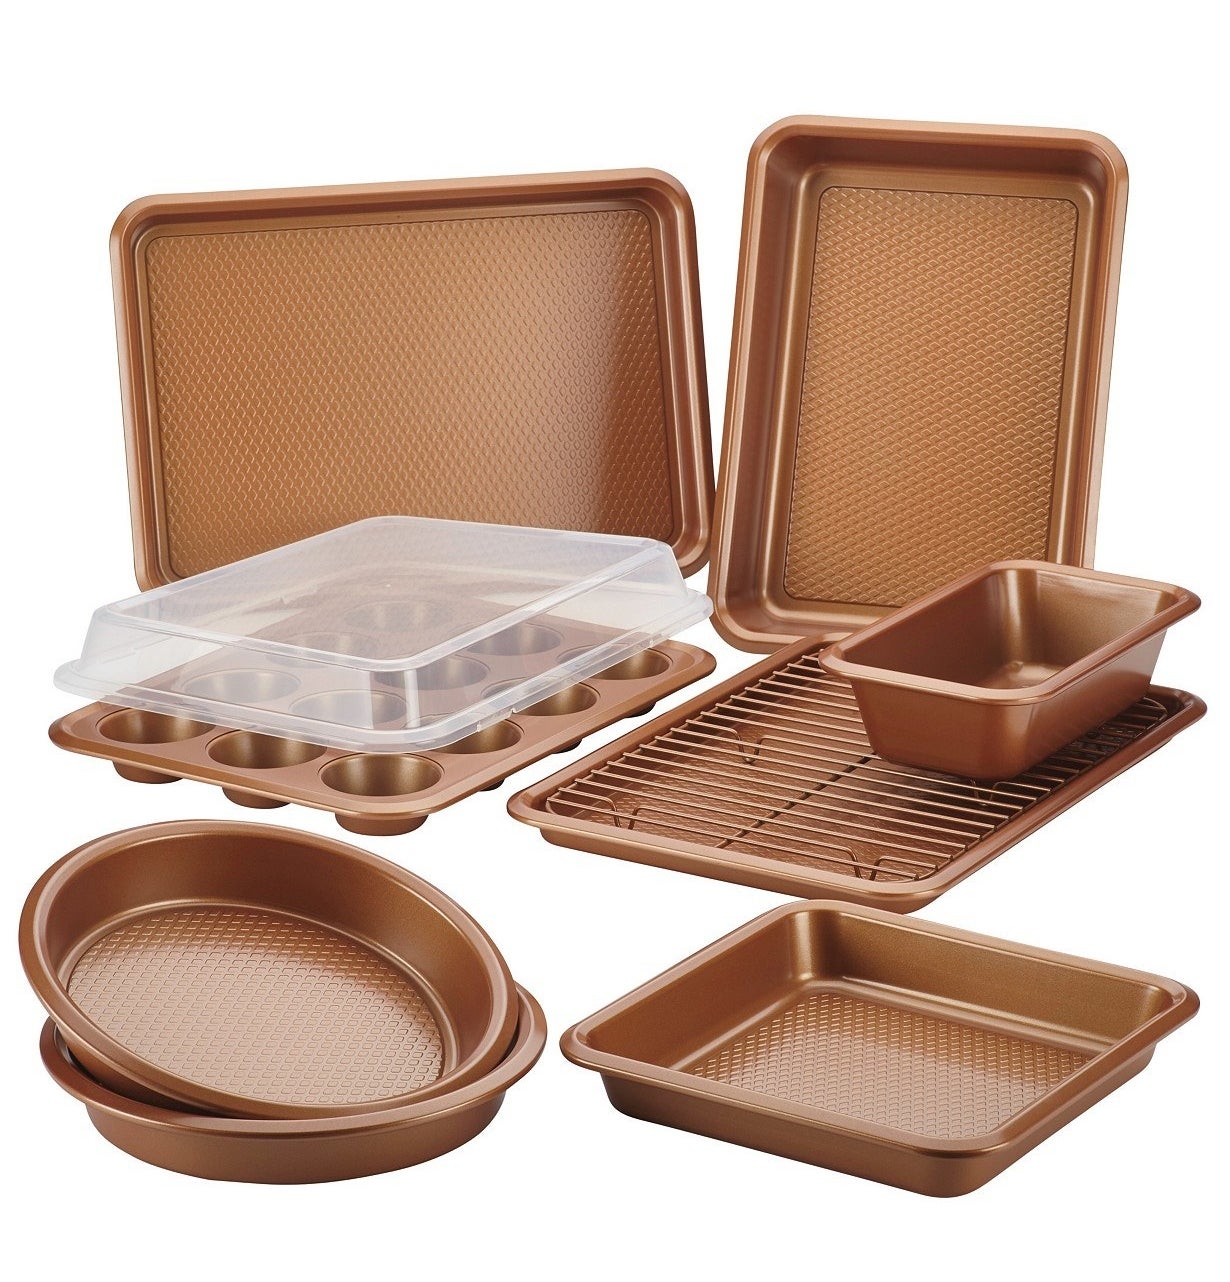 the full Ayesha Curry 10 piece bakeware set